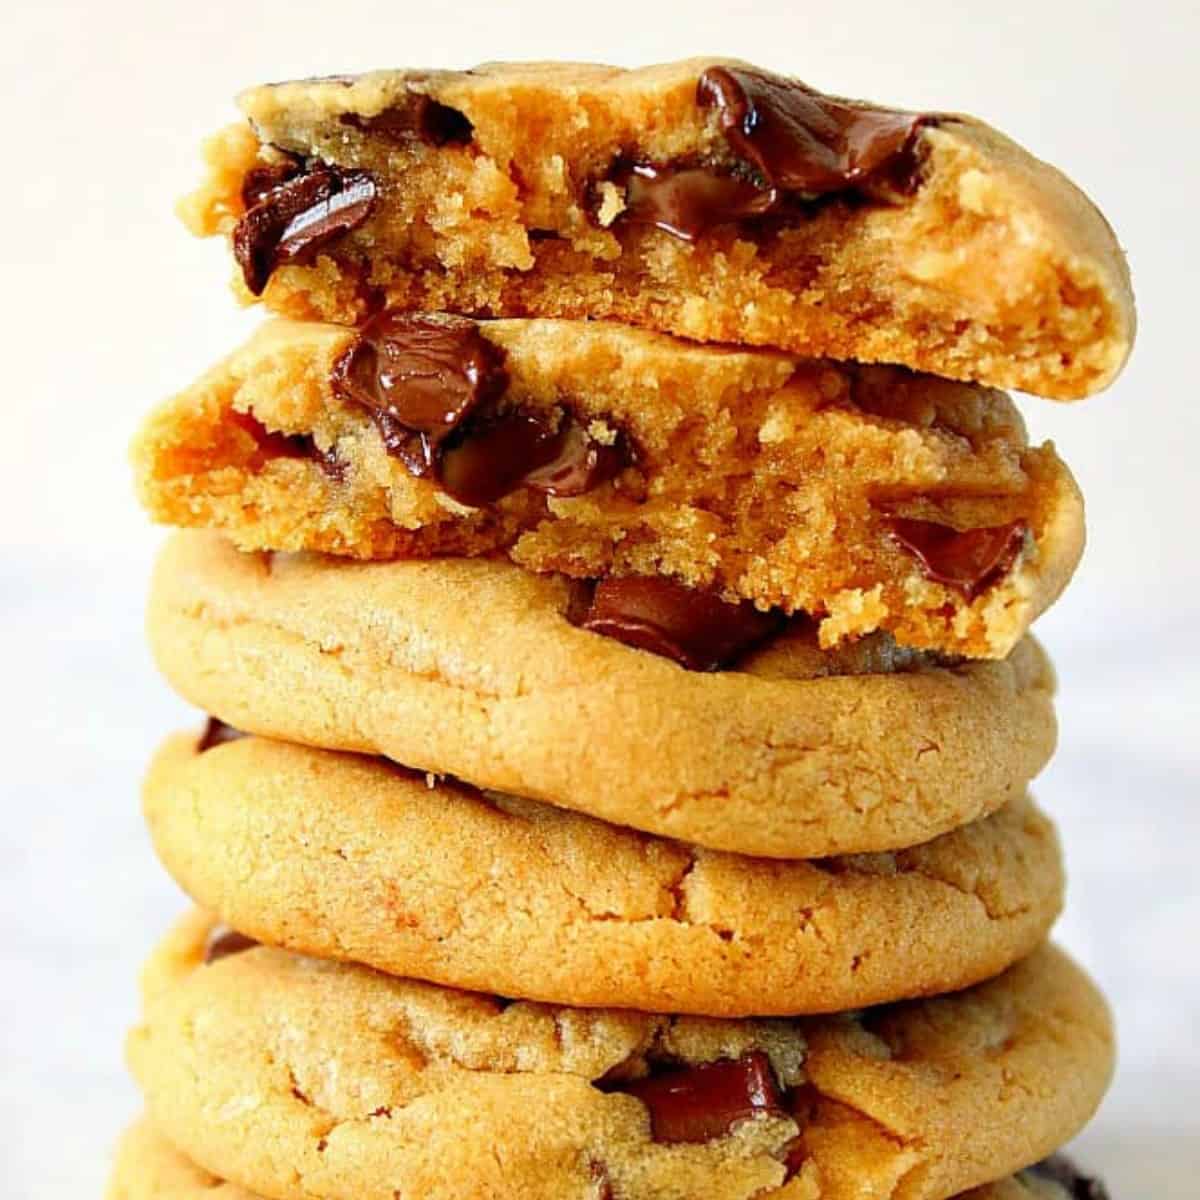 Peanut butter cookies stacked.